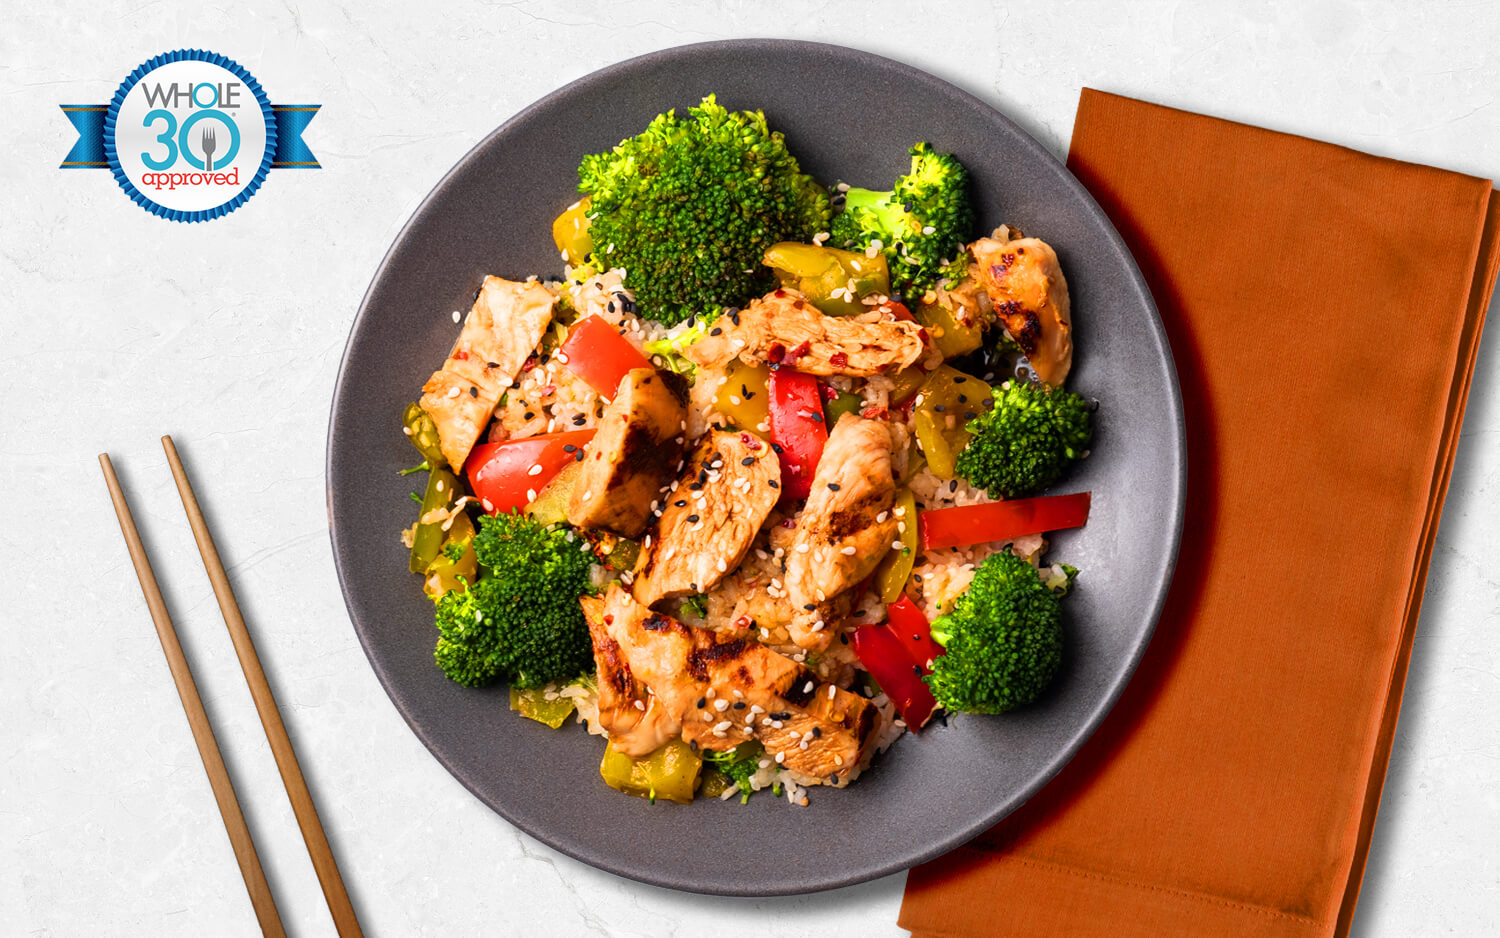 Chicken stir fry with cauliflower rice, teriyaki glaze, roasted bell peppers, broccoli, and topped with sesame seeds. 